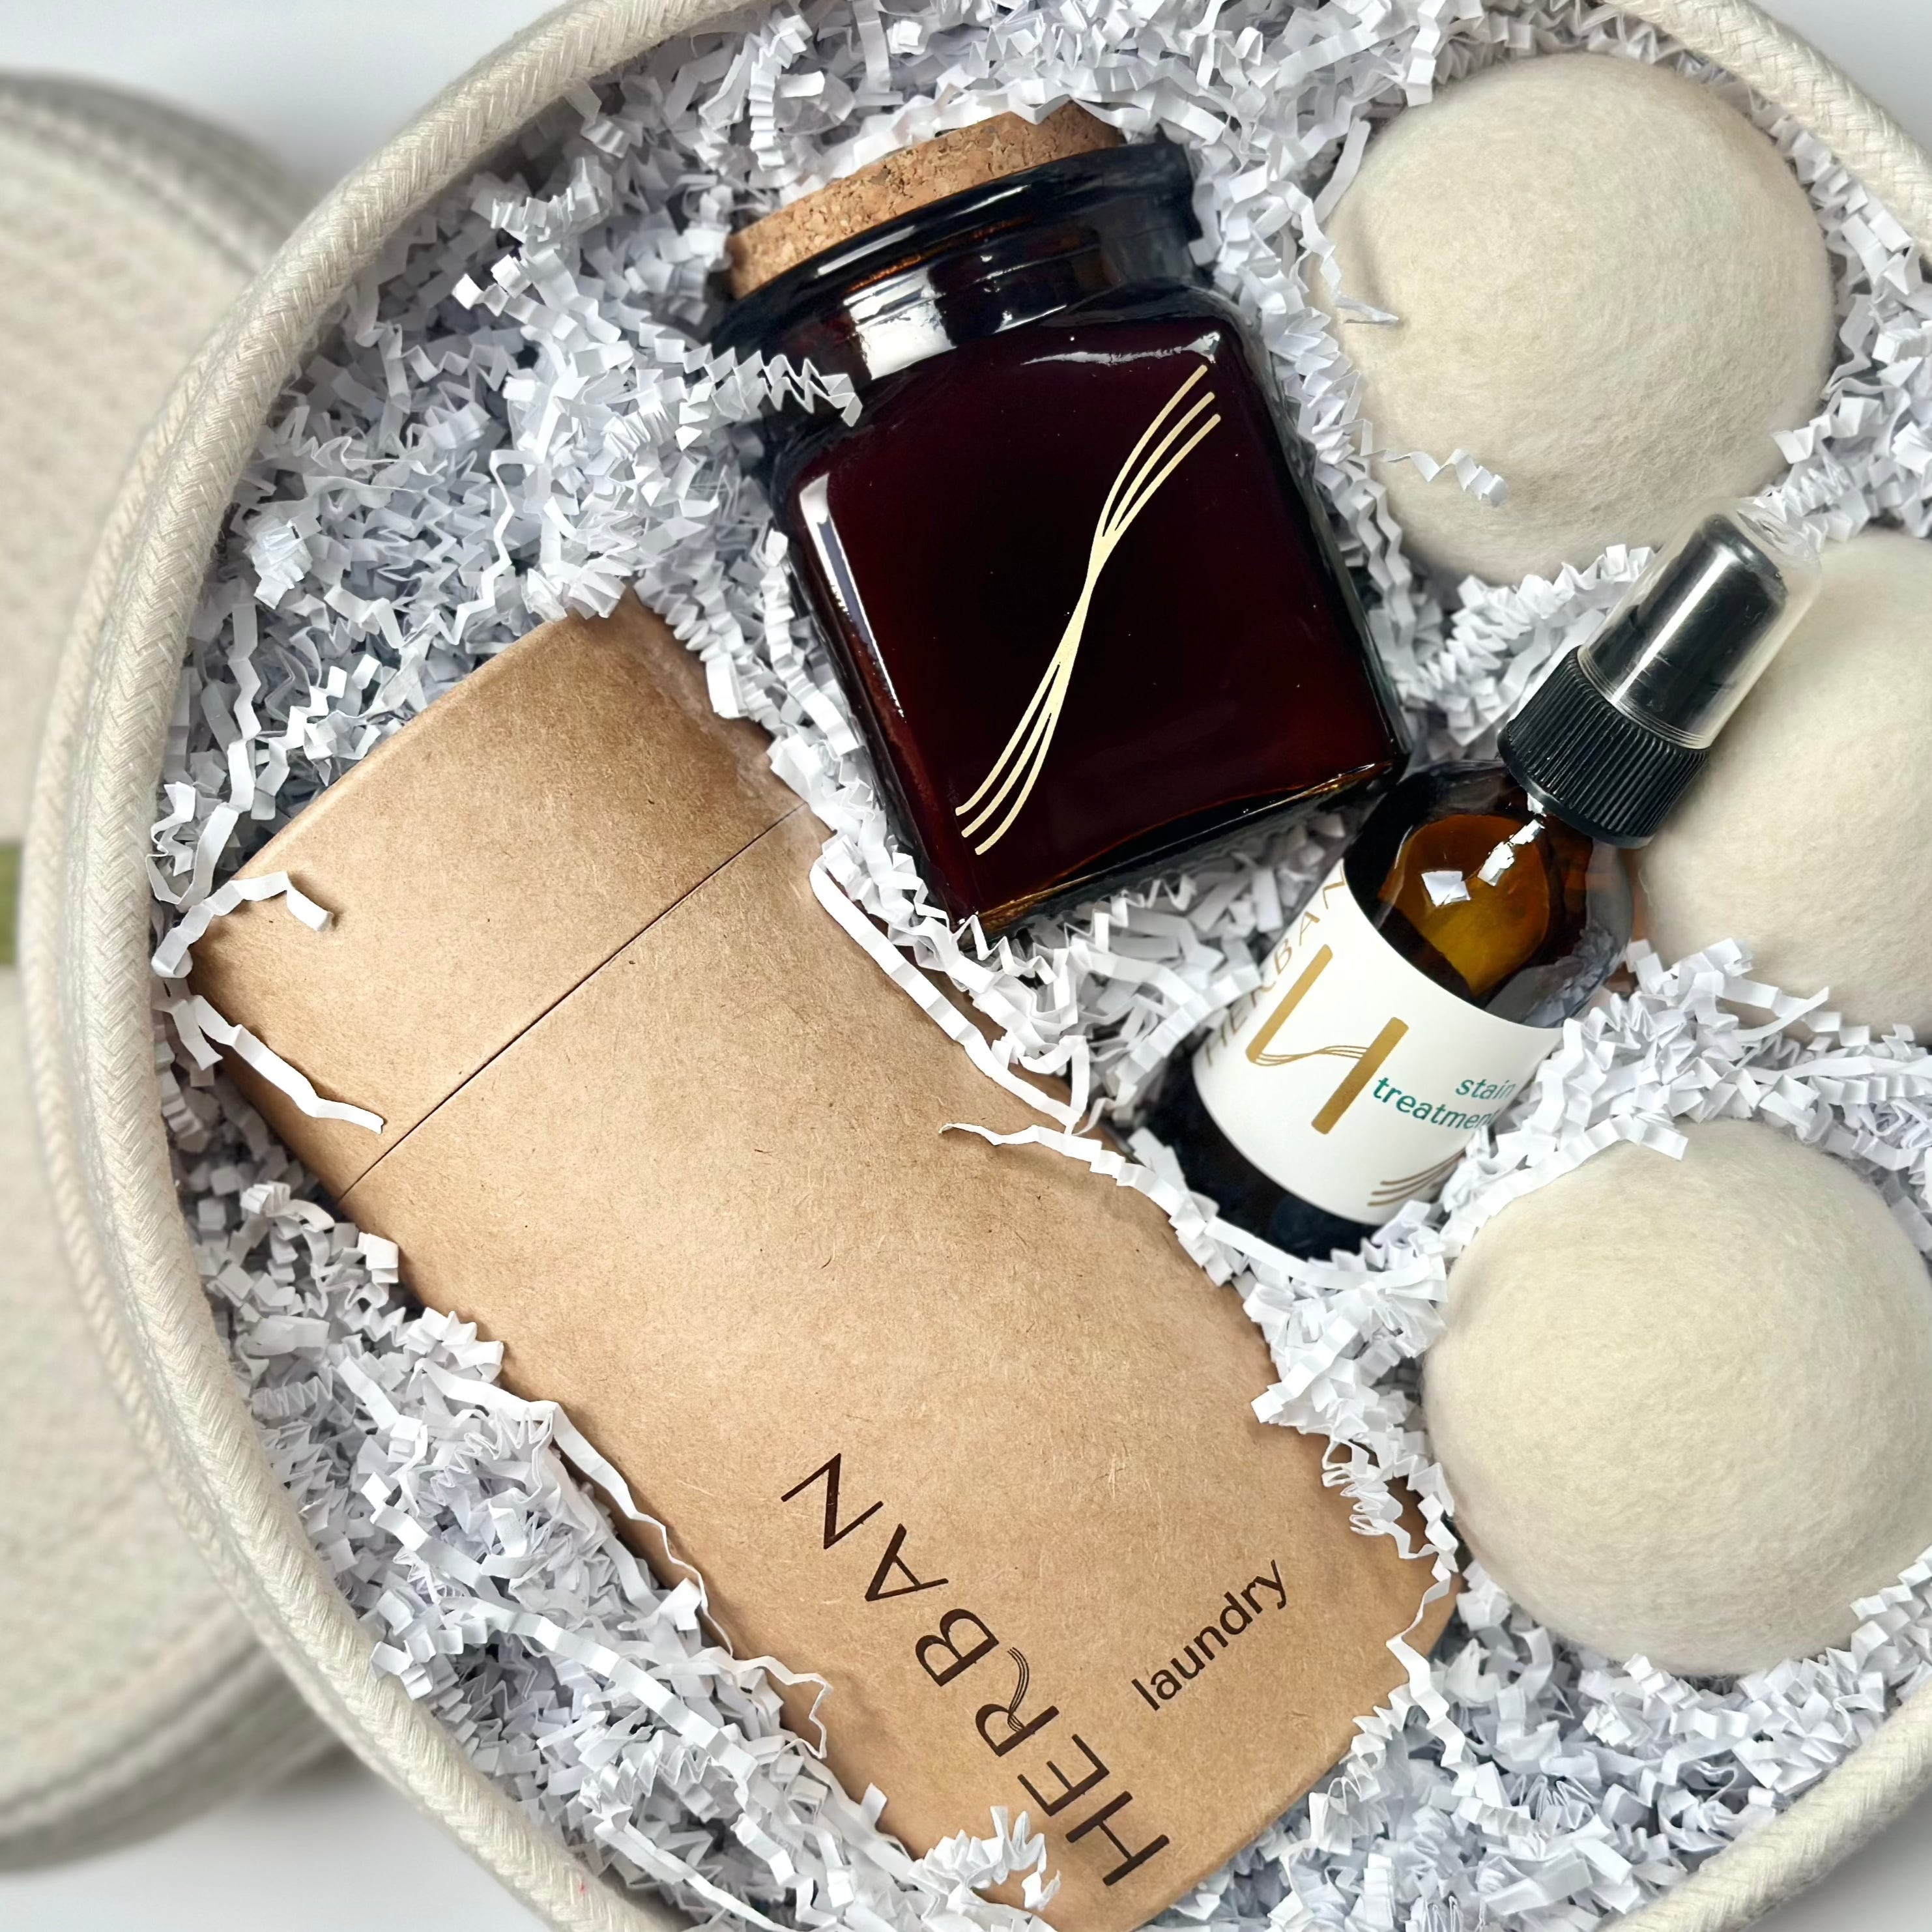 Cotton round rope basket filled with Laundry powder packaged in a paper tube, Wool dryer balls, soy candle in square amber glass and an amber glass of stain removing spray.  